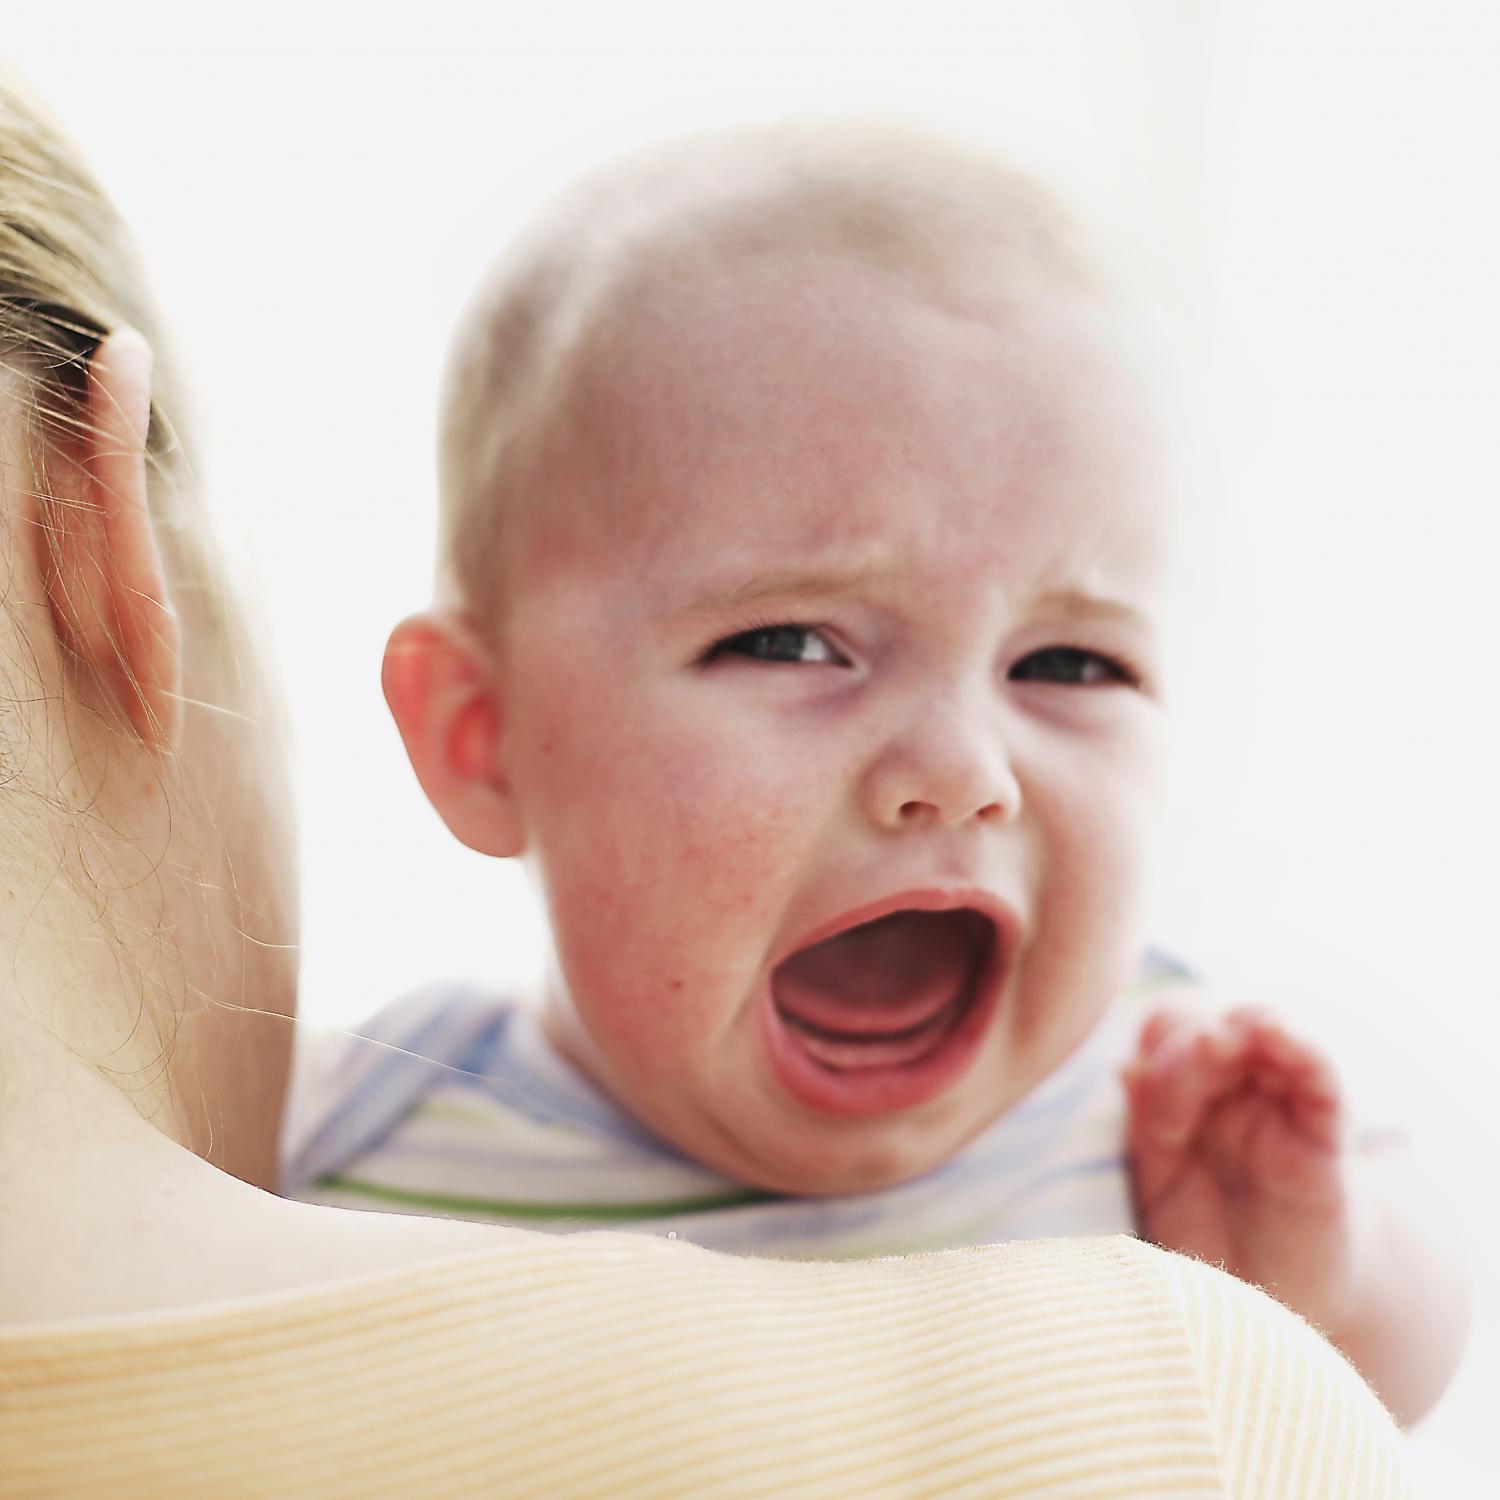 Psychologist: Crying It Out Damages Baby's Brain | Parenting